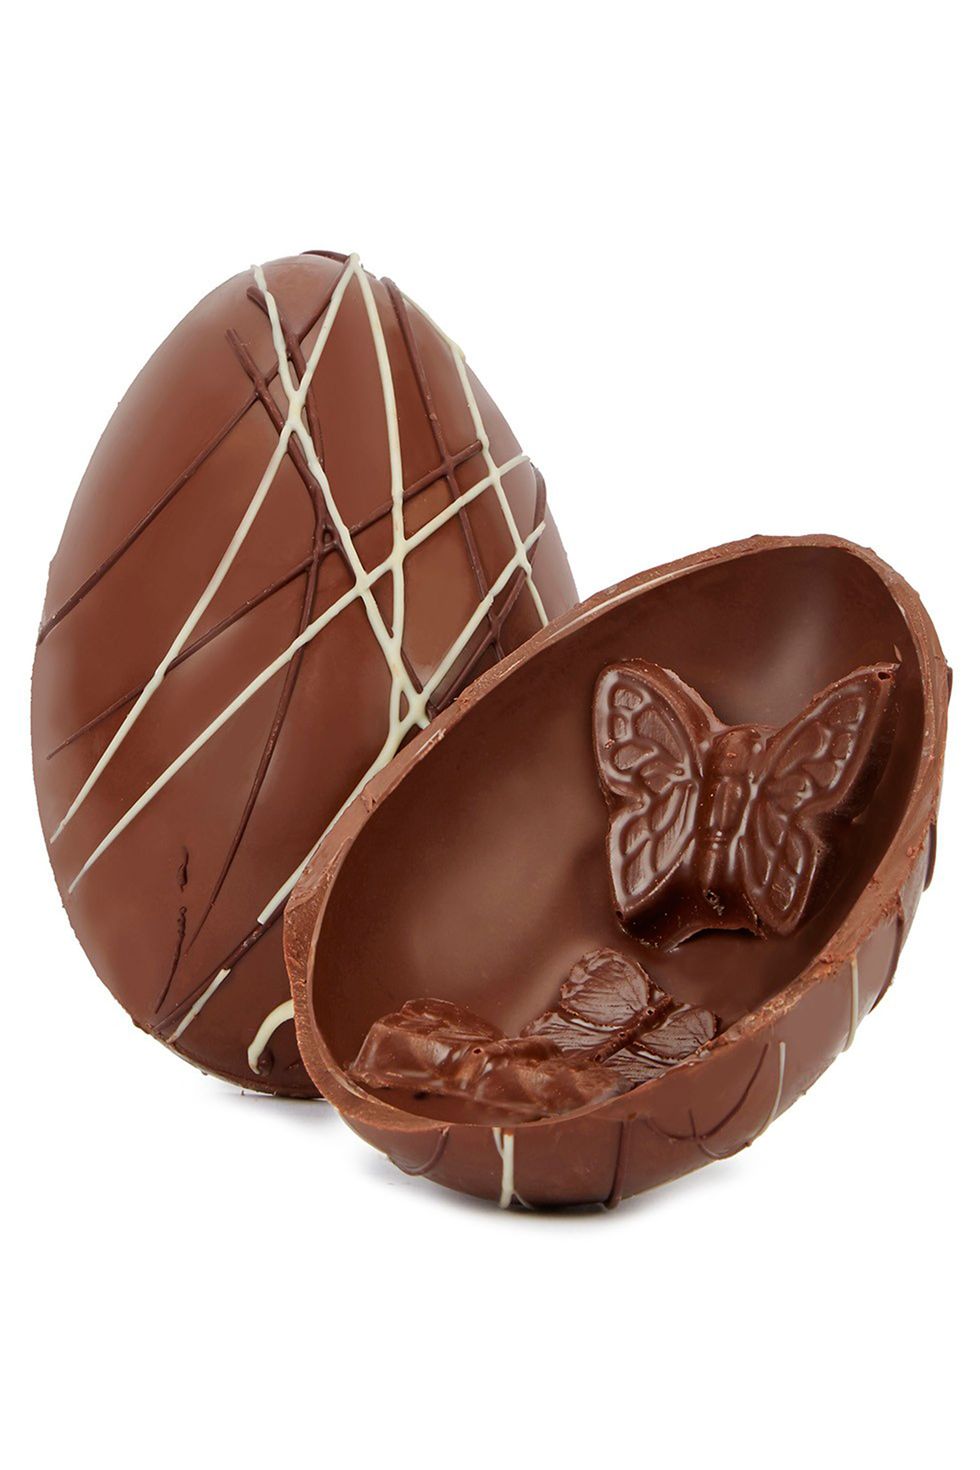 Best luxury easter eggs - Chococo butterfly egg